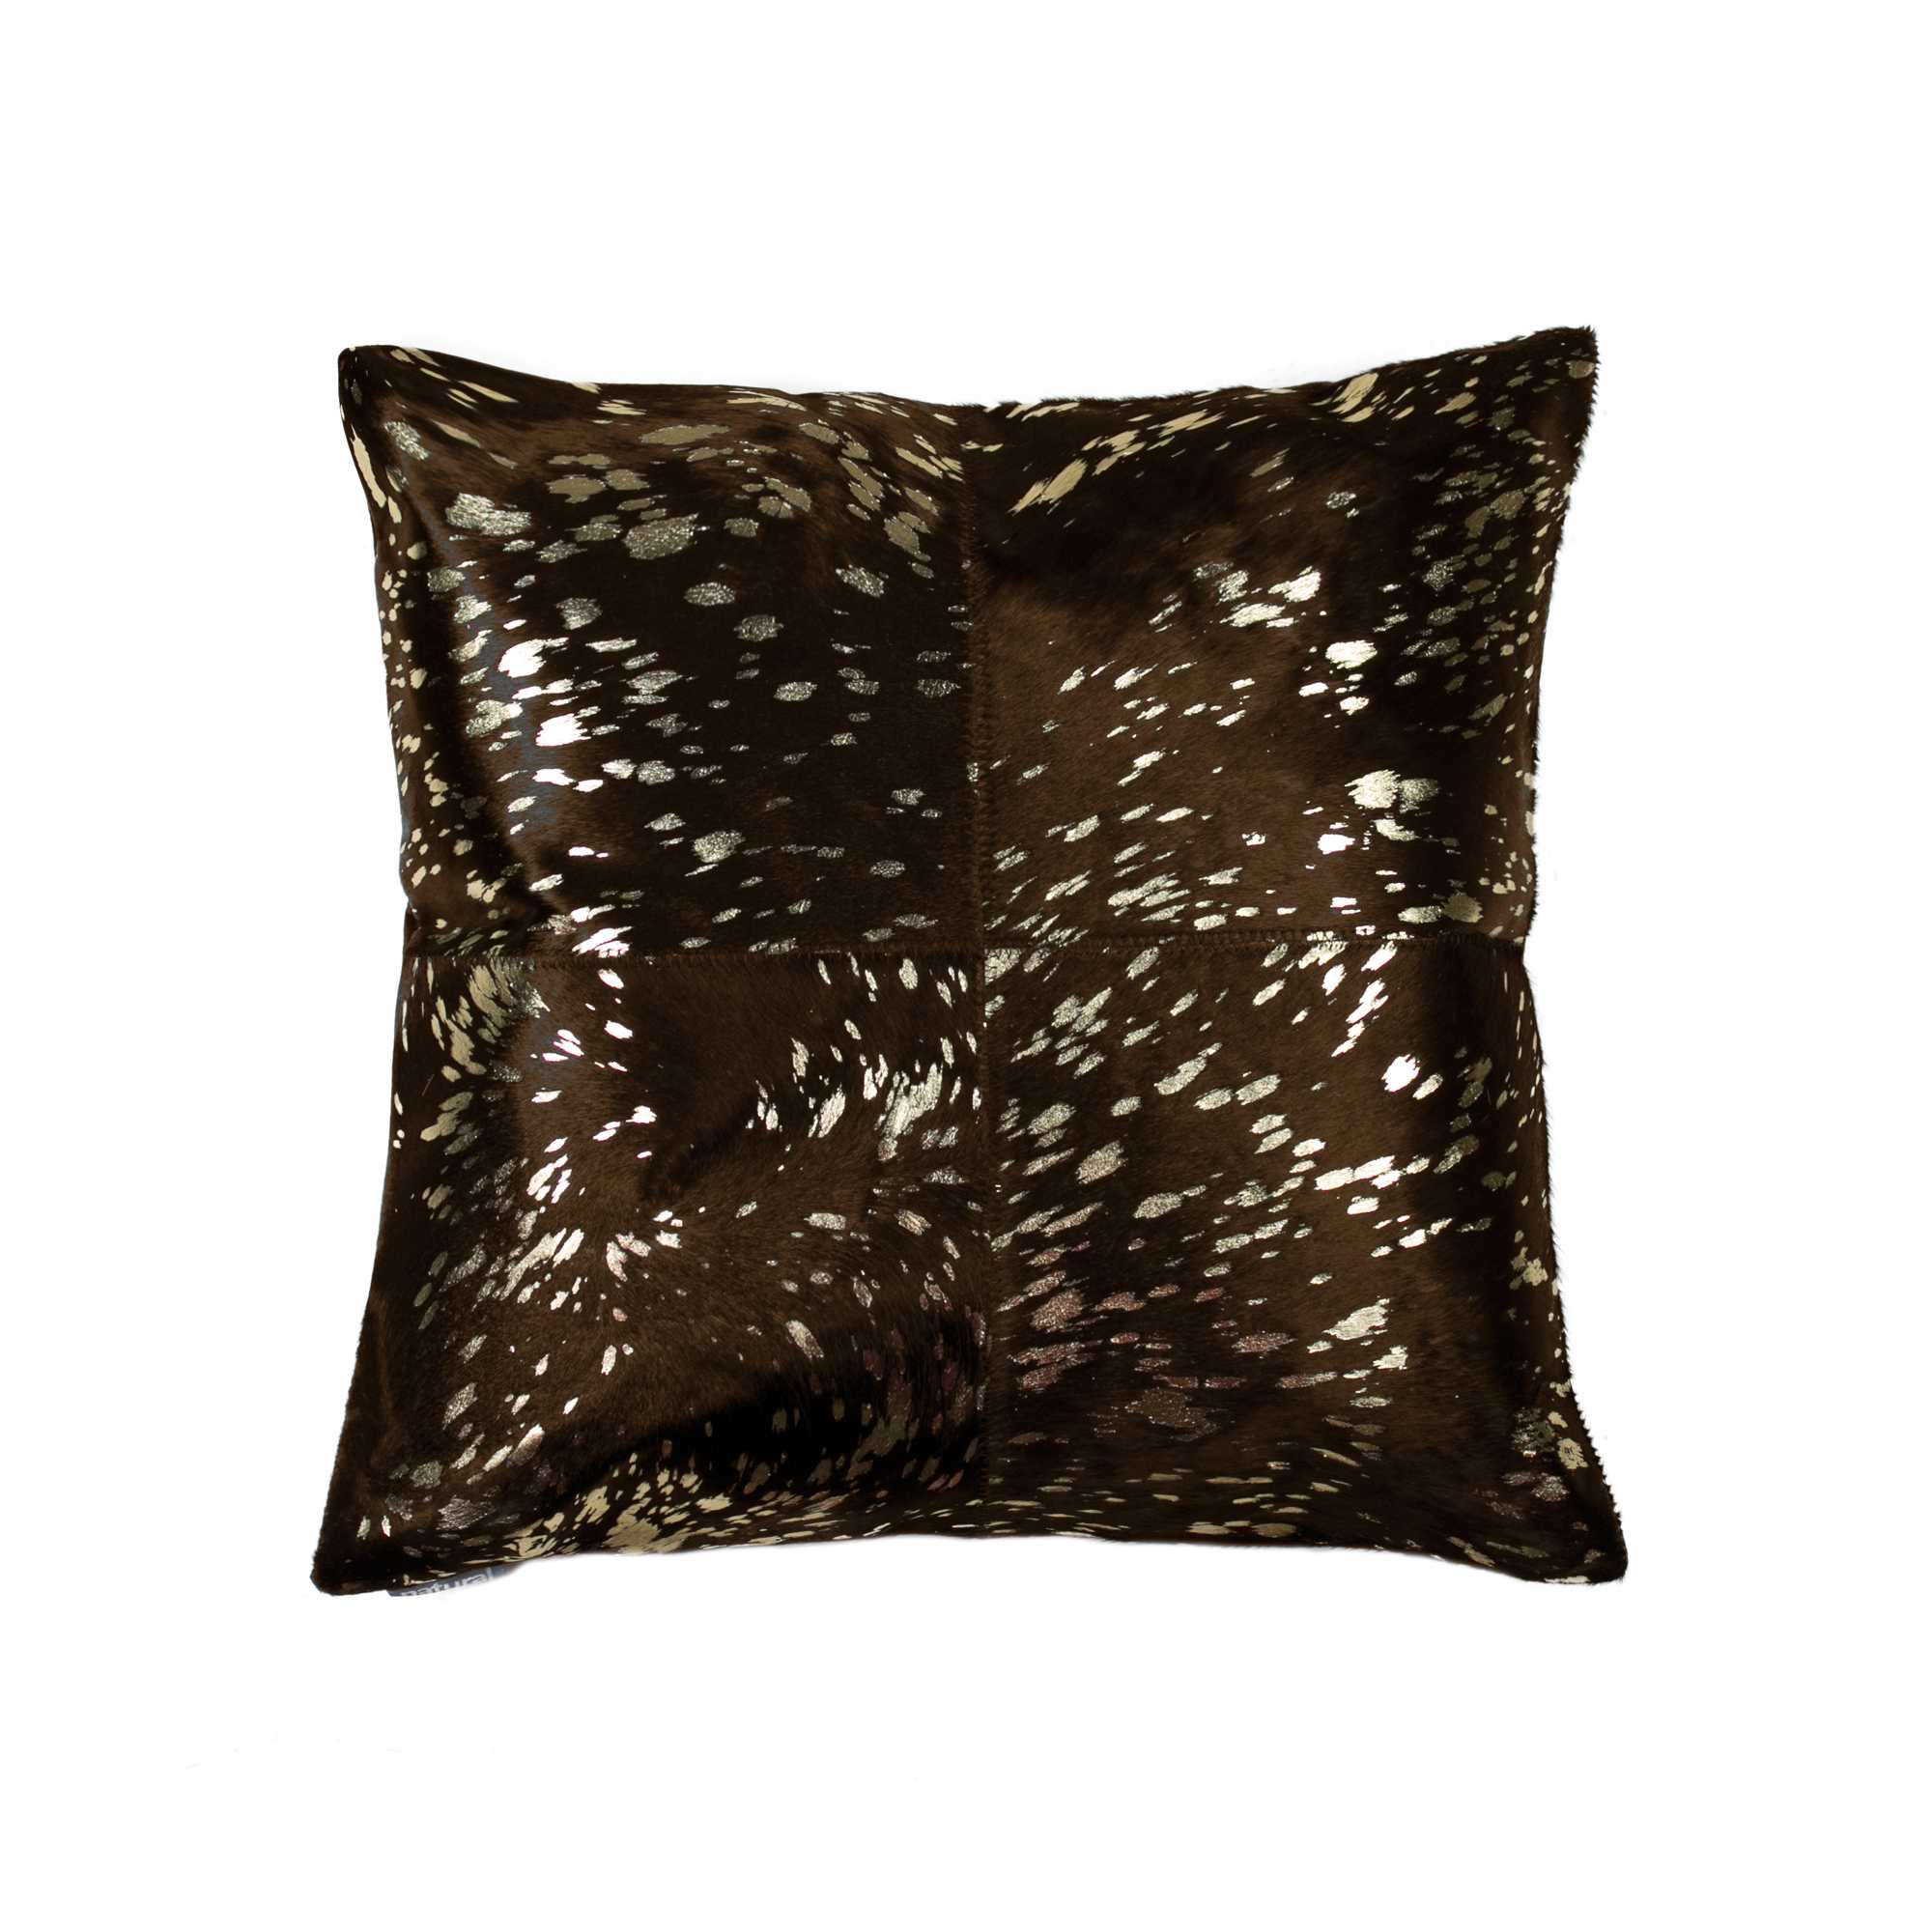 18" x 18" x 5" Gold And Chocolate Quattro - Pillow